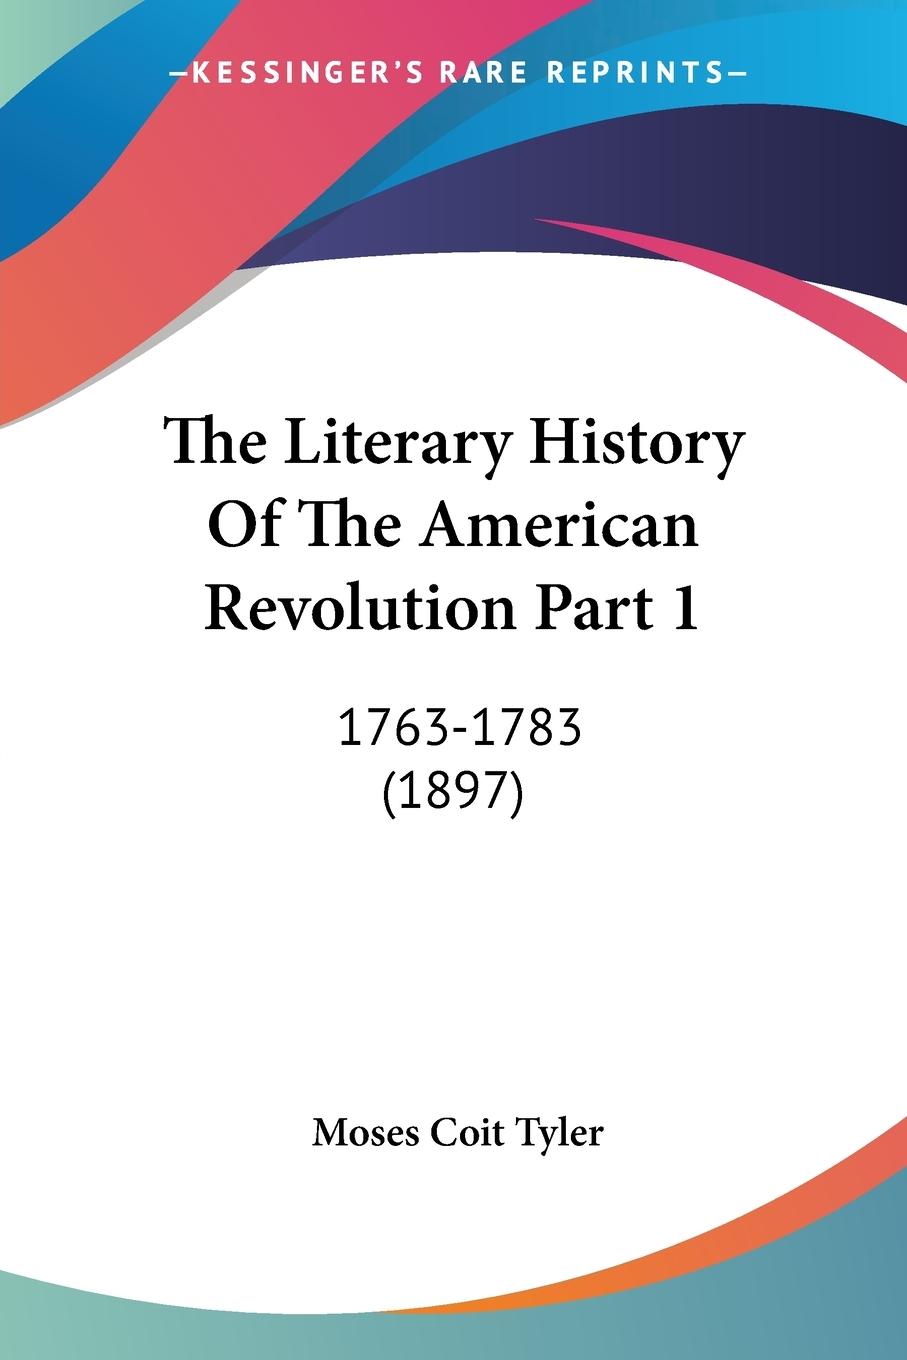 The Literary History Of The American Revolution Part 1 - Tyler, Moses Coit